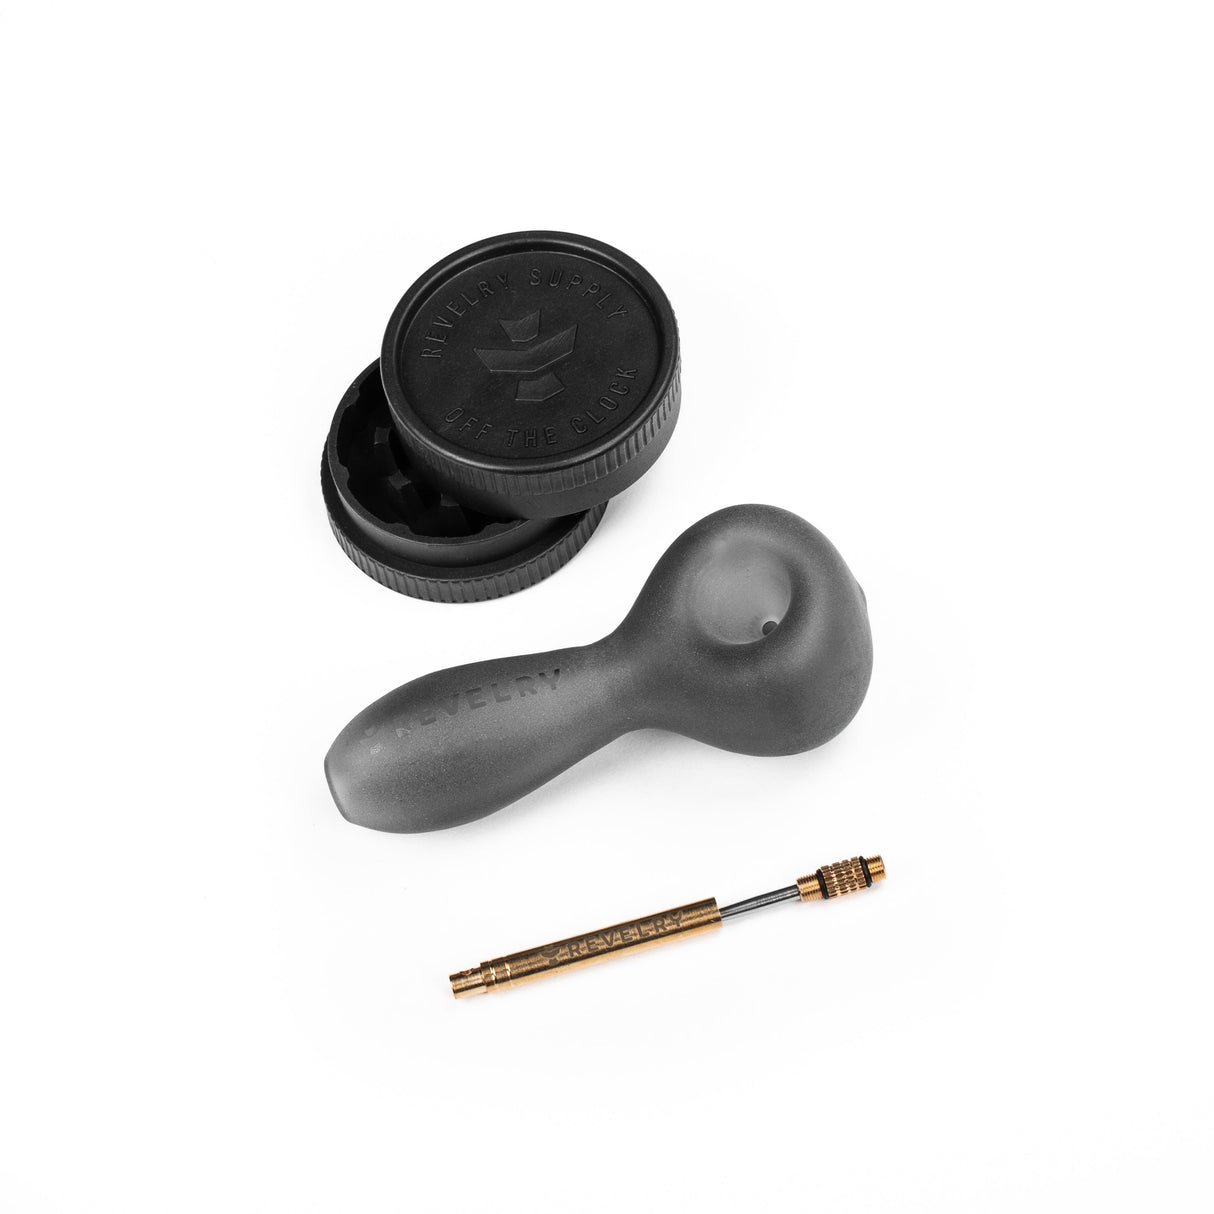 Revelry Supply The Pipe Kit - Smell Proof Black Pipe, Grinder, and Tool on White